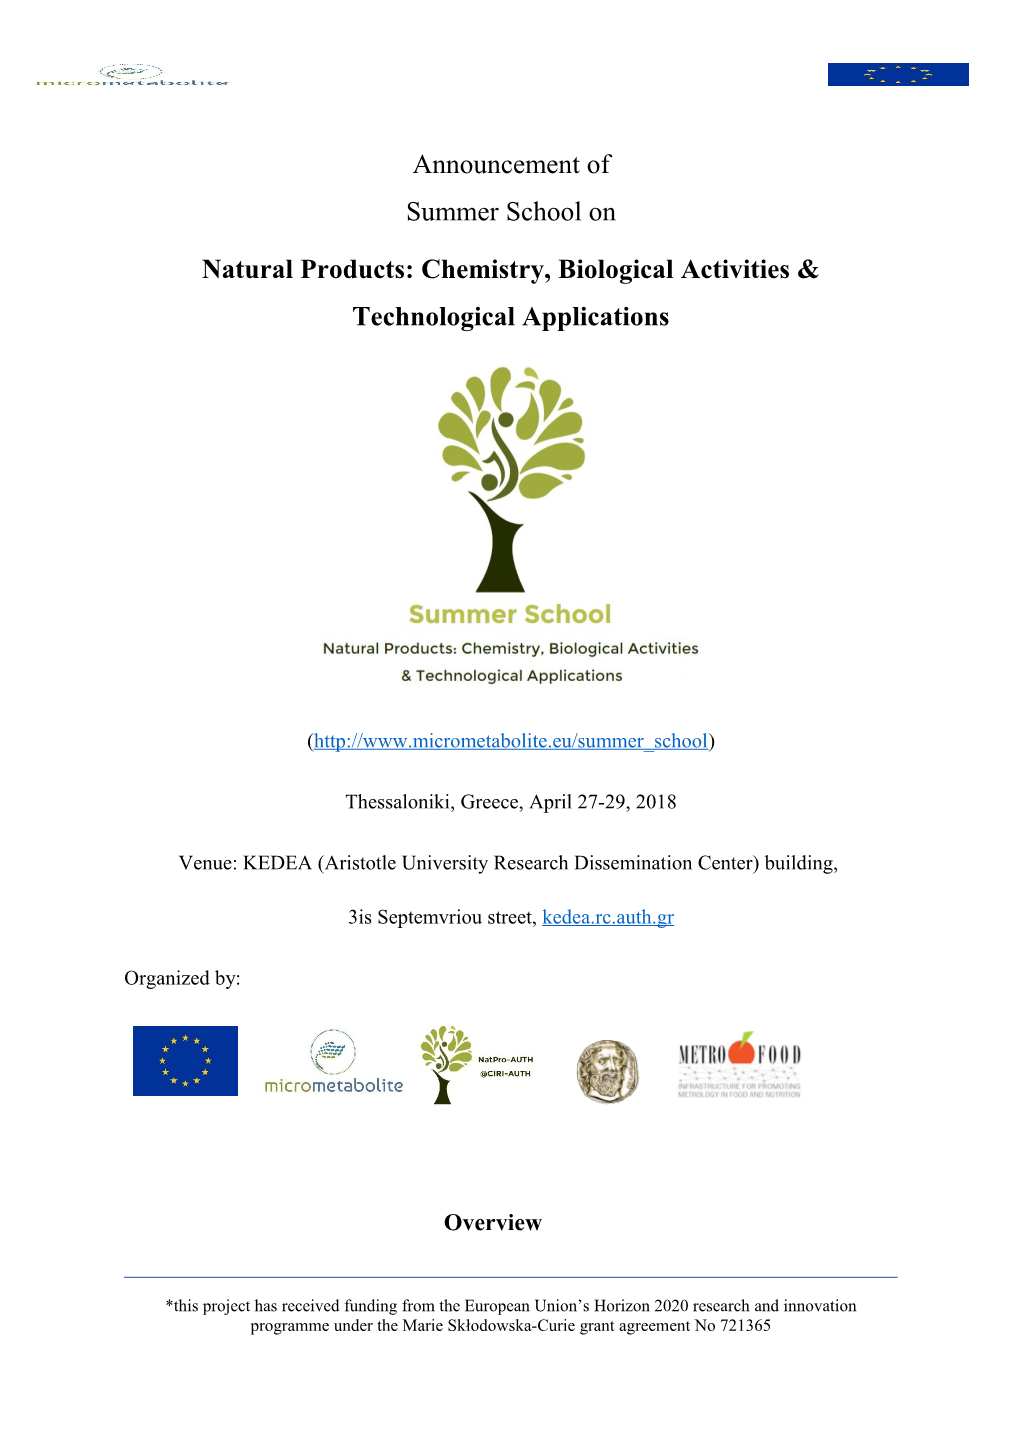 Natural Products: Chemistry, Biological Activities & Technological Applications